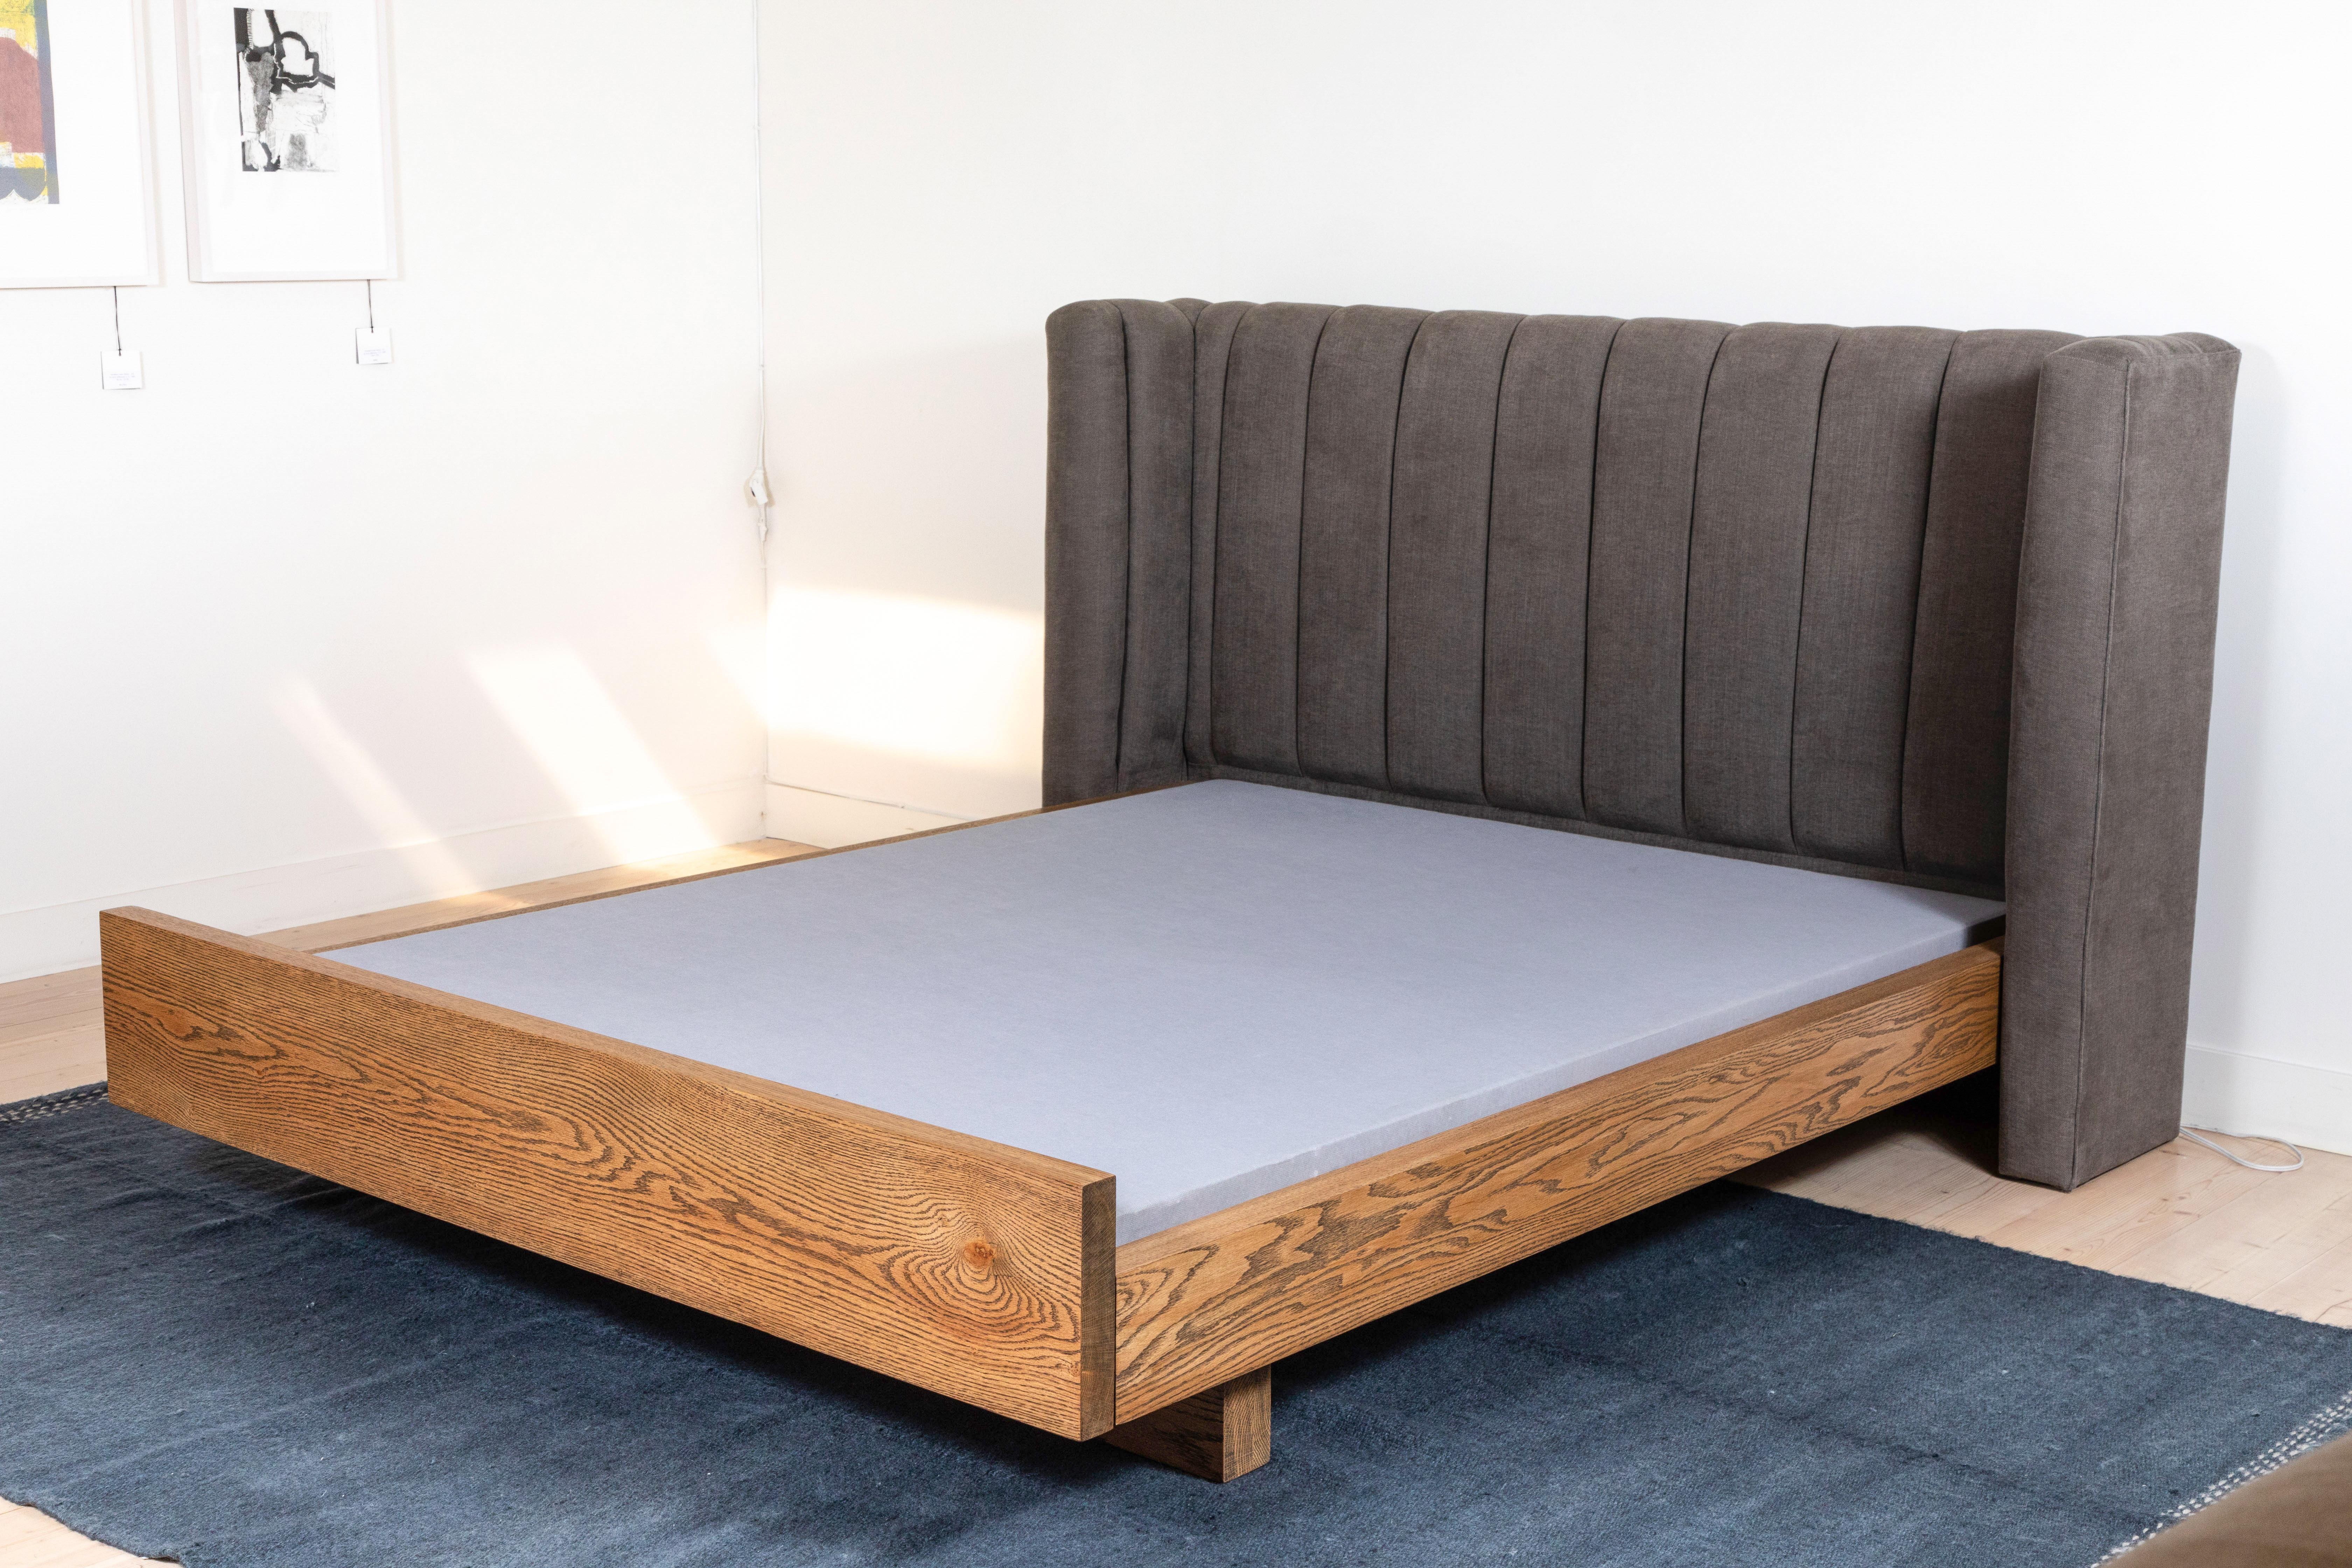 The Isherwood bed features a plinth base made of American walnut or white oak and a channel tufted shelter headboard. Slats are provided. Shown here as Queen-size in smoked oak. 

Available to order in Customer's Own Material with a 10-12 week lead